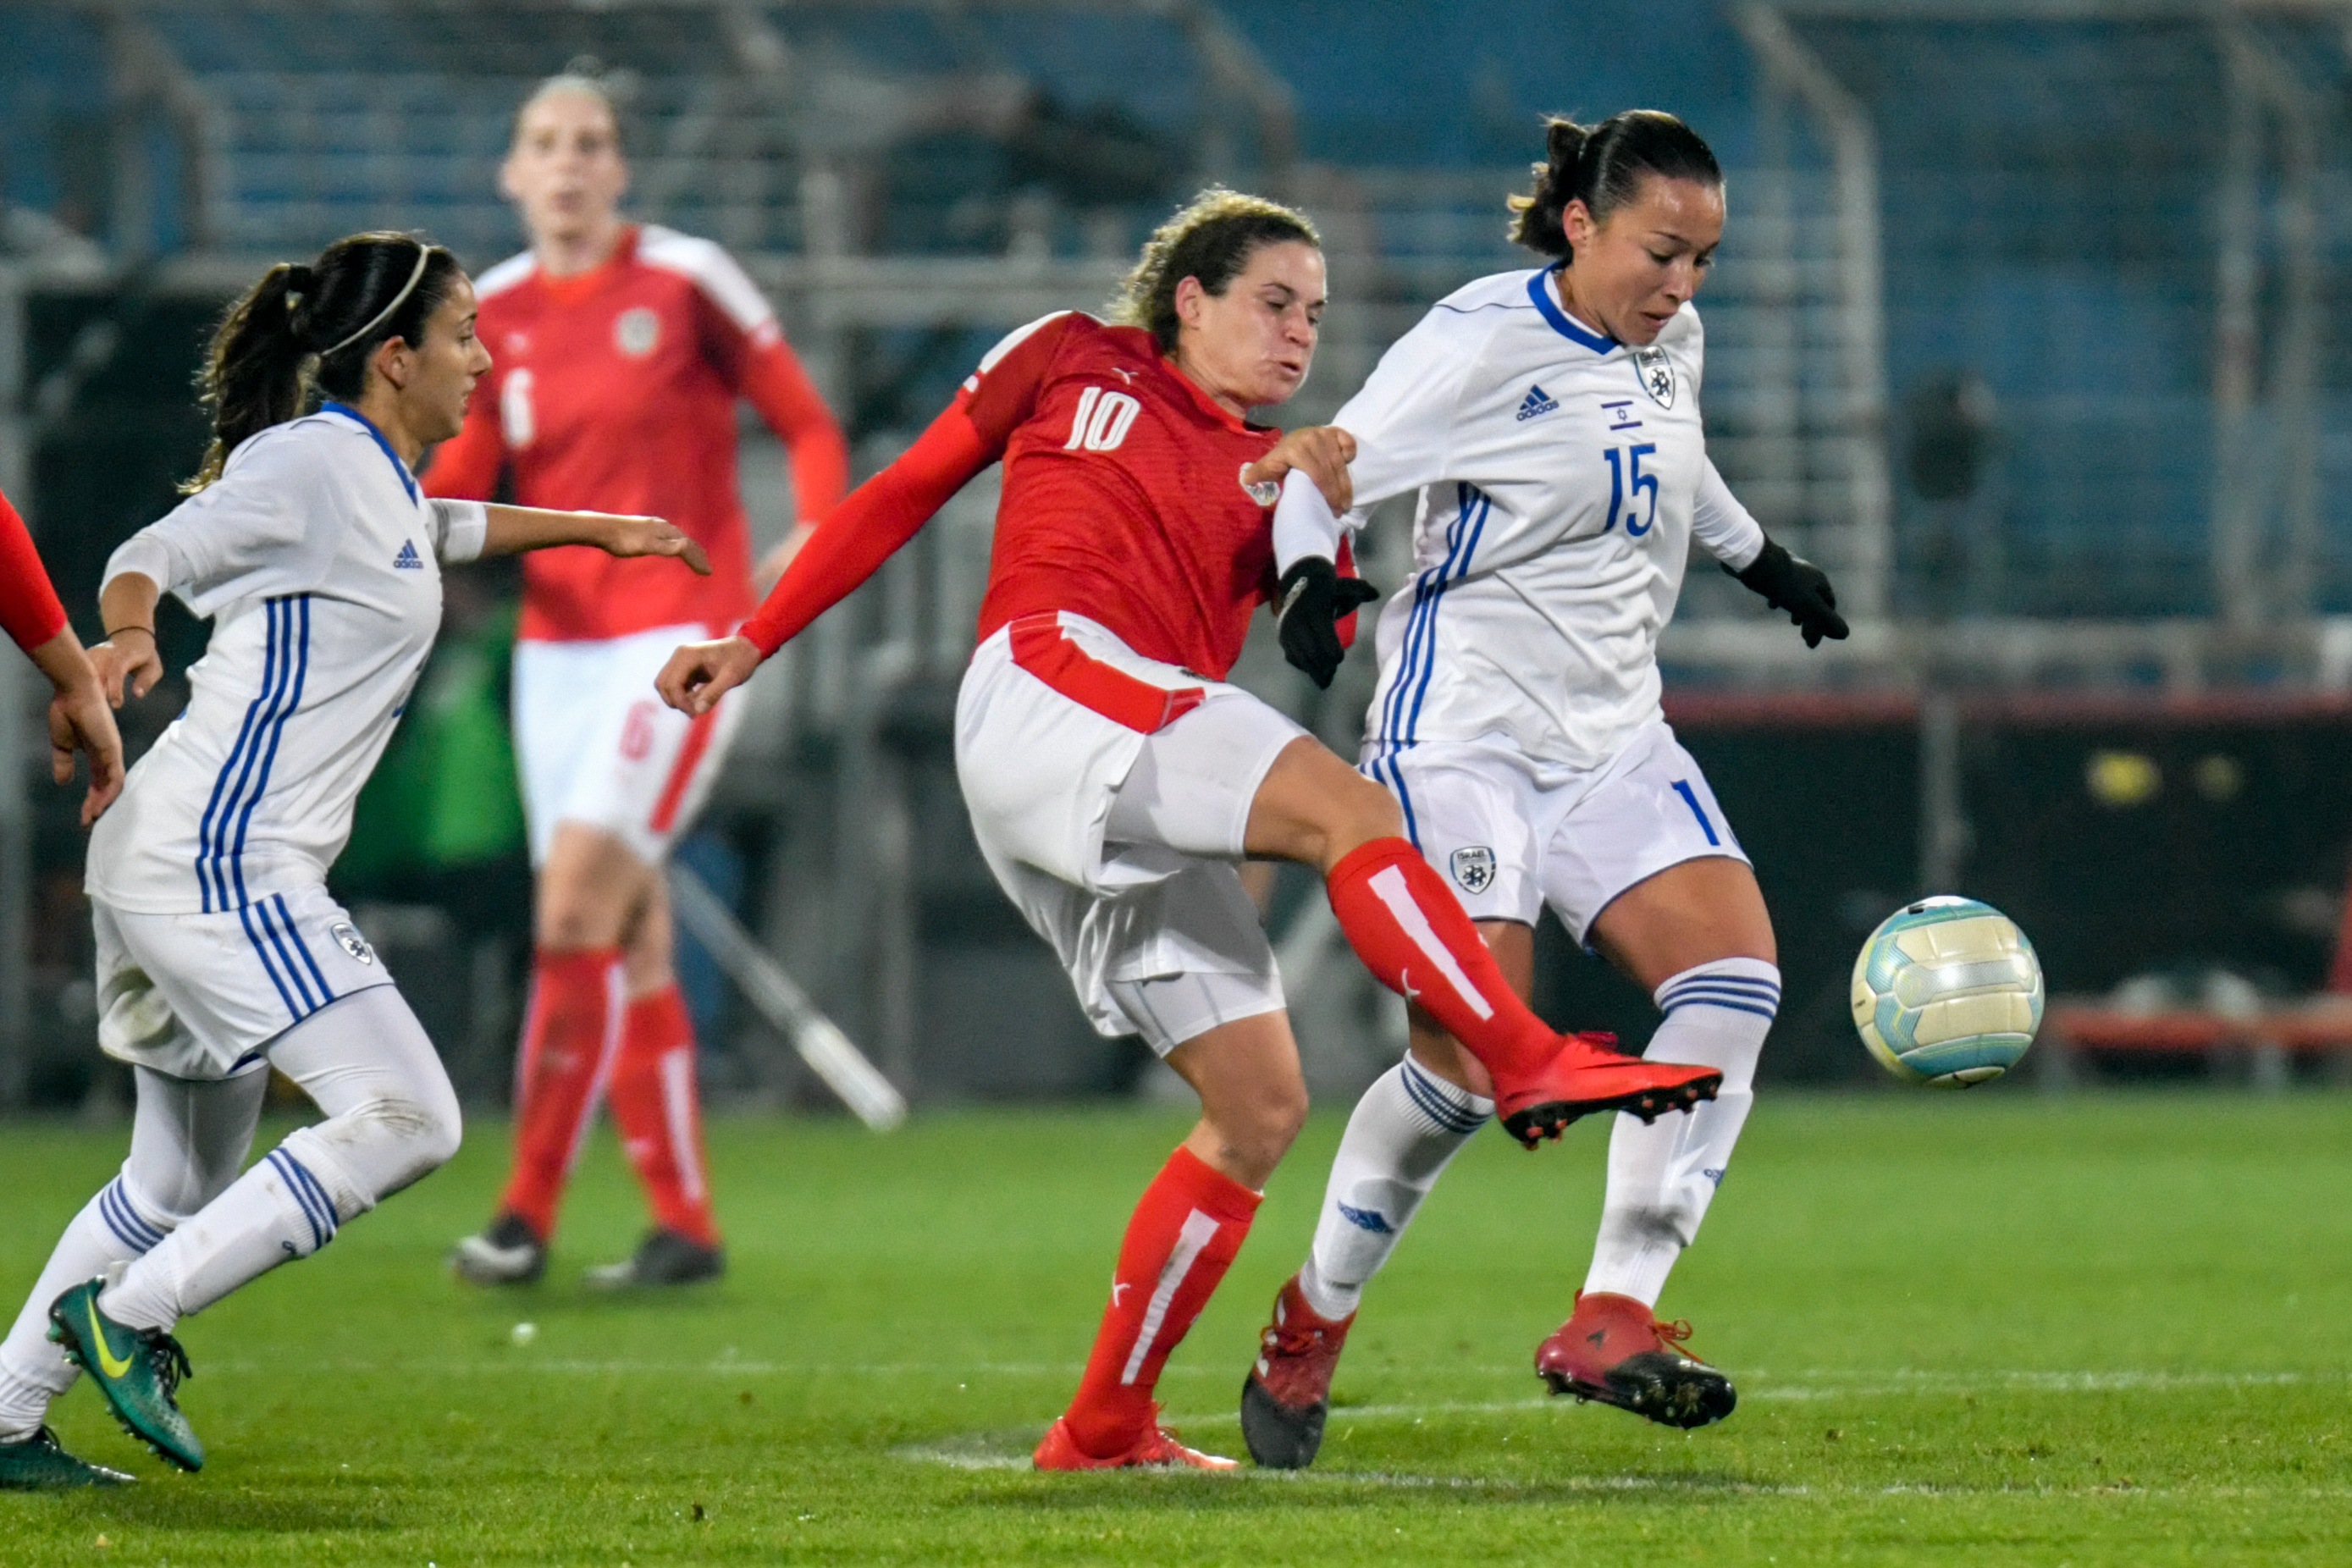 File:20171123 FIFA Women's World Cup 2019 Qualifying Round AUT-ISR 850 6467.jpg - Wikimedia Commons